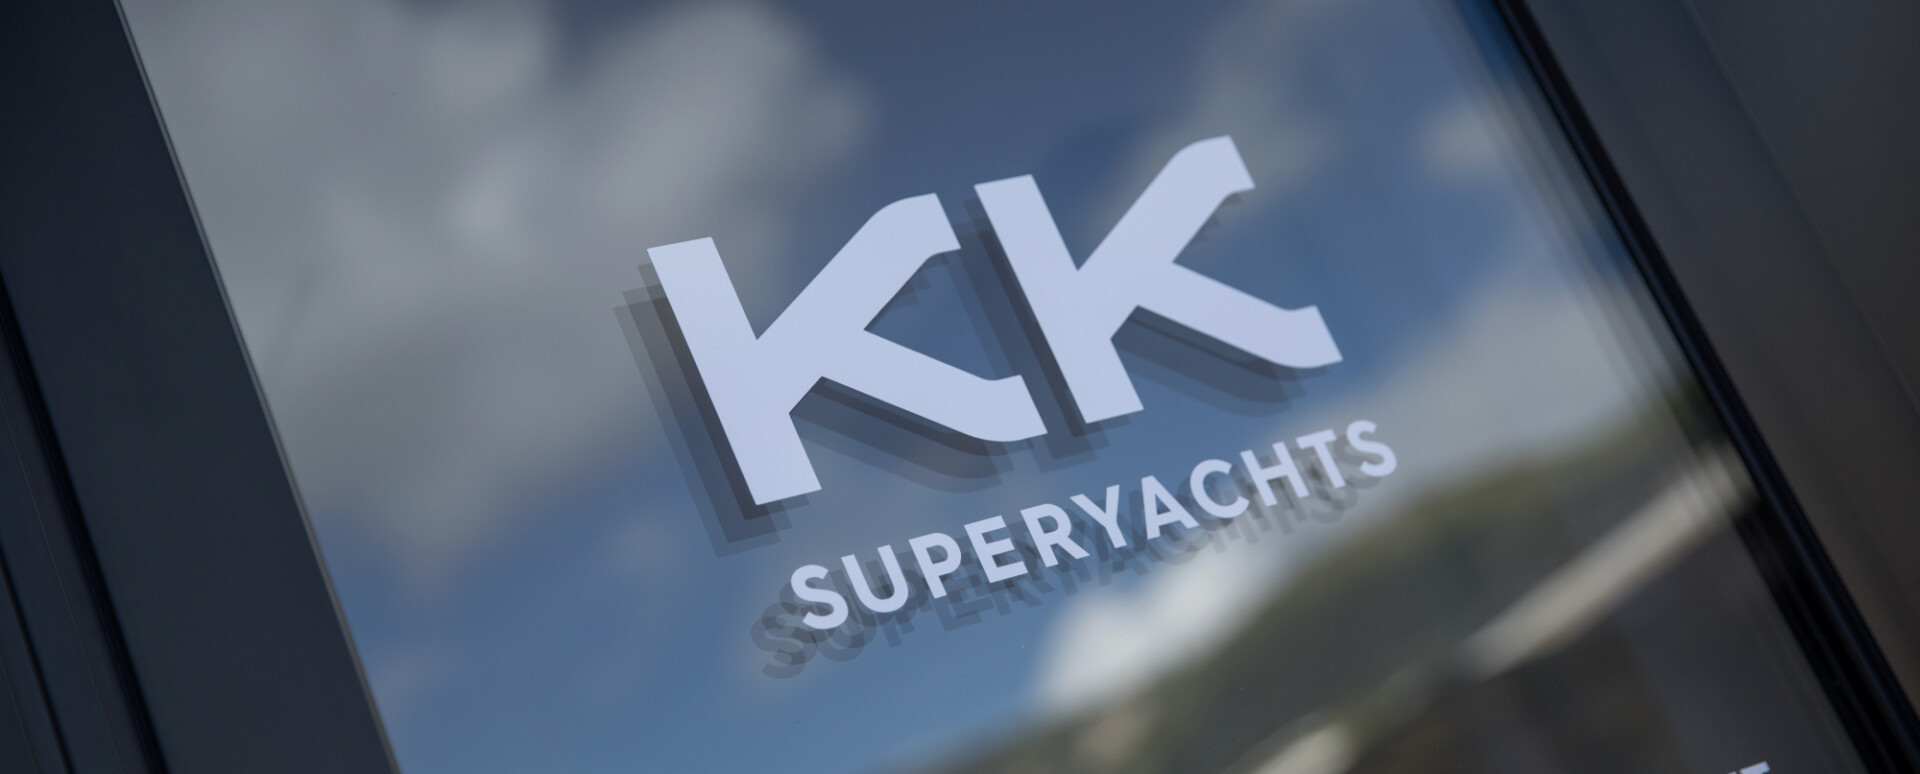                                                                                                     New turning point for KK Superyachts with two office locations in Monaco.
                                                                                            